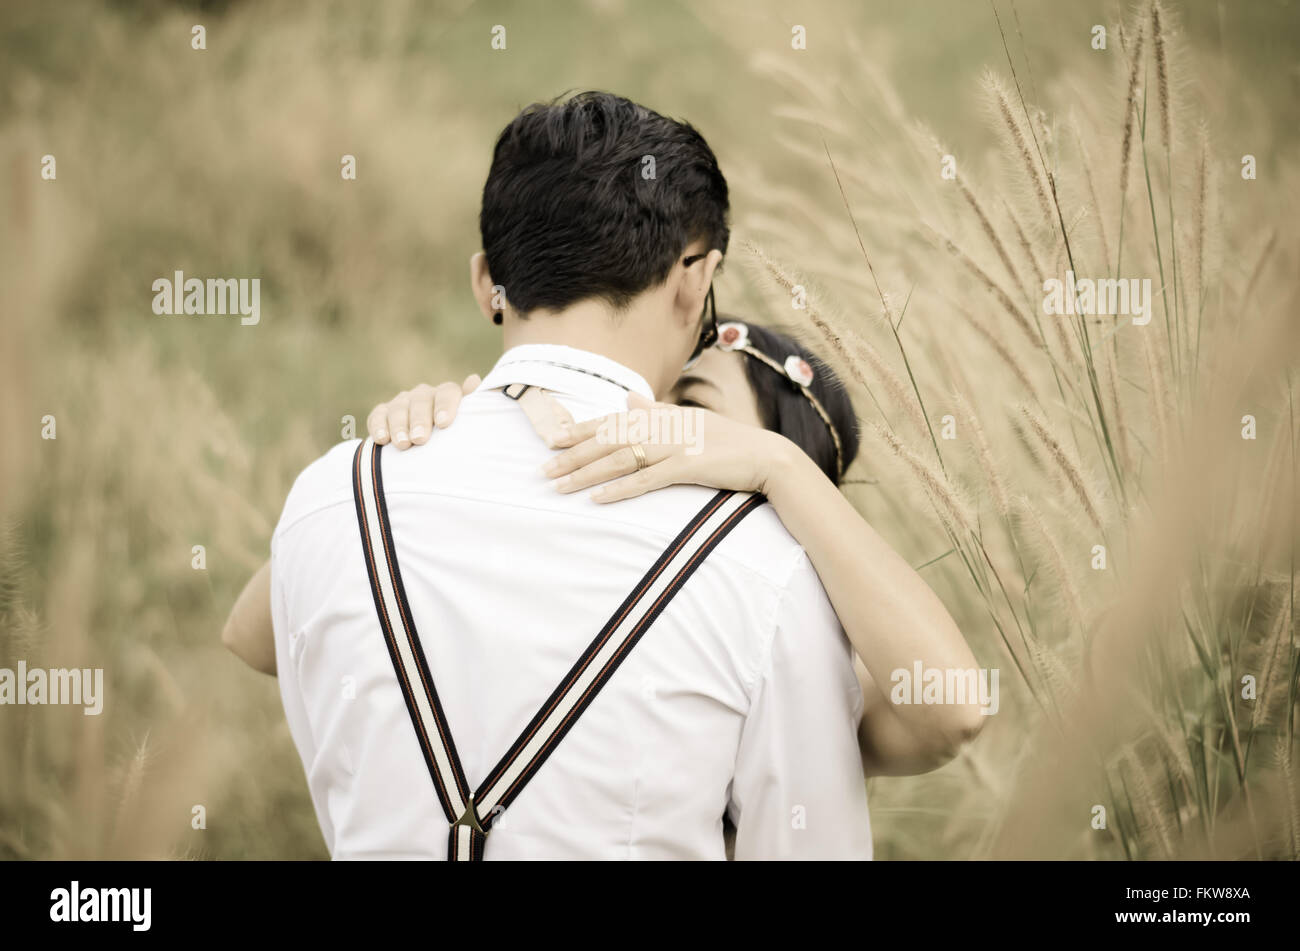 couple kiss and embracing in grass field Stock Photo